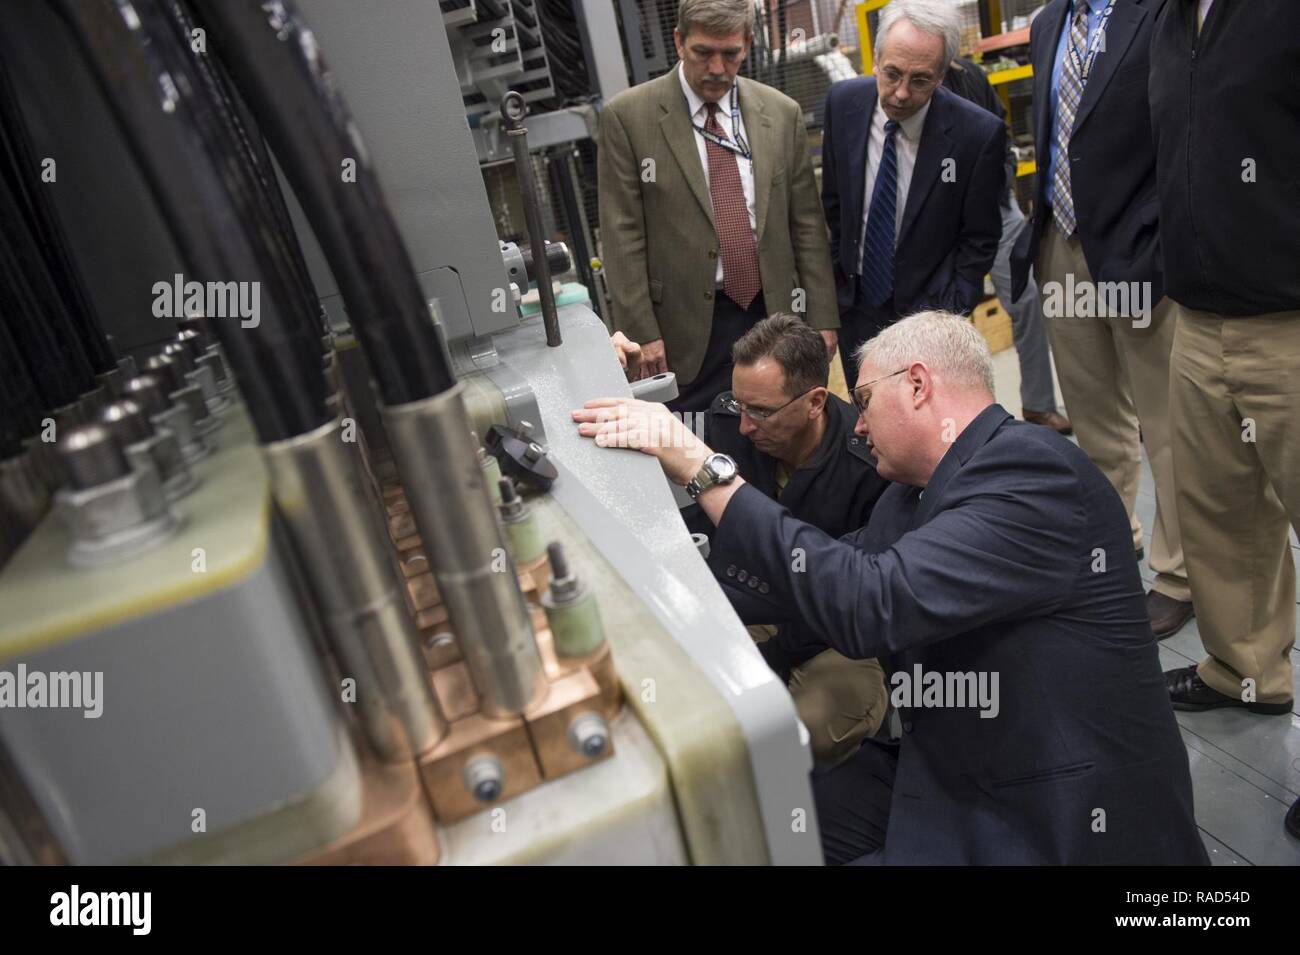 DAHLGREN (Jan. 12, 2017) Tom Boucher, program manager for the Electromagnetic Railgun at the Office of Naval Research (ONR), talks to Rear Adm. David Hahn, chief of naval research, during a visit to the railgun facility located at Naval Surface Warfare Center, Dahlgren Division. Tom Boucher, second from right, program manager for the Electromagnetic Railgun at the Office of Naval Research (ONR), talks to Rear Adm. David Hahn, chief of naval research, during a visit to the railgun facility located at Naval Surface Warfare Center, Dahlgren Division. The EM Railgun launcher is a long-range weapon Stock Photo